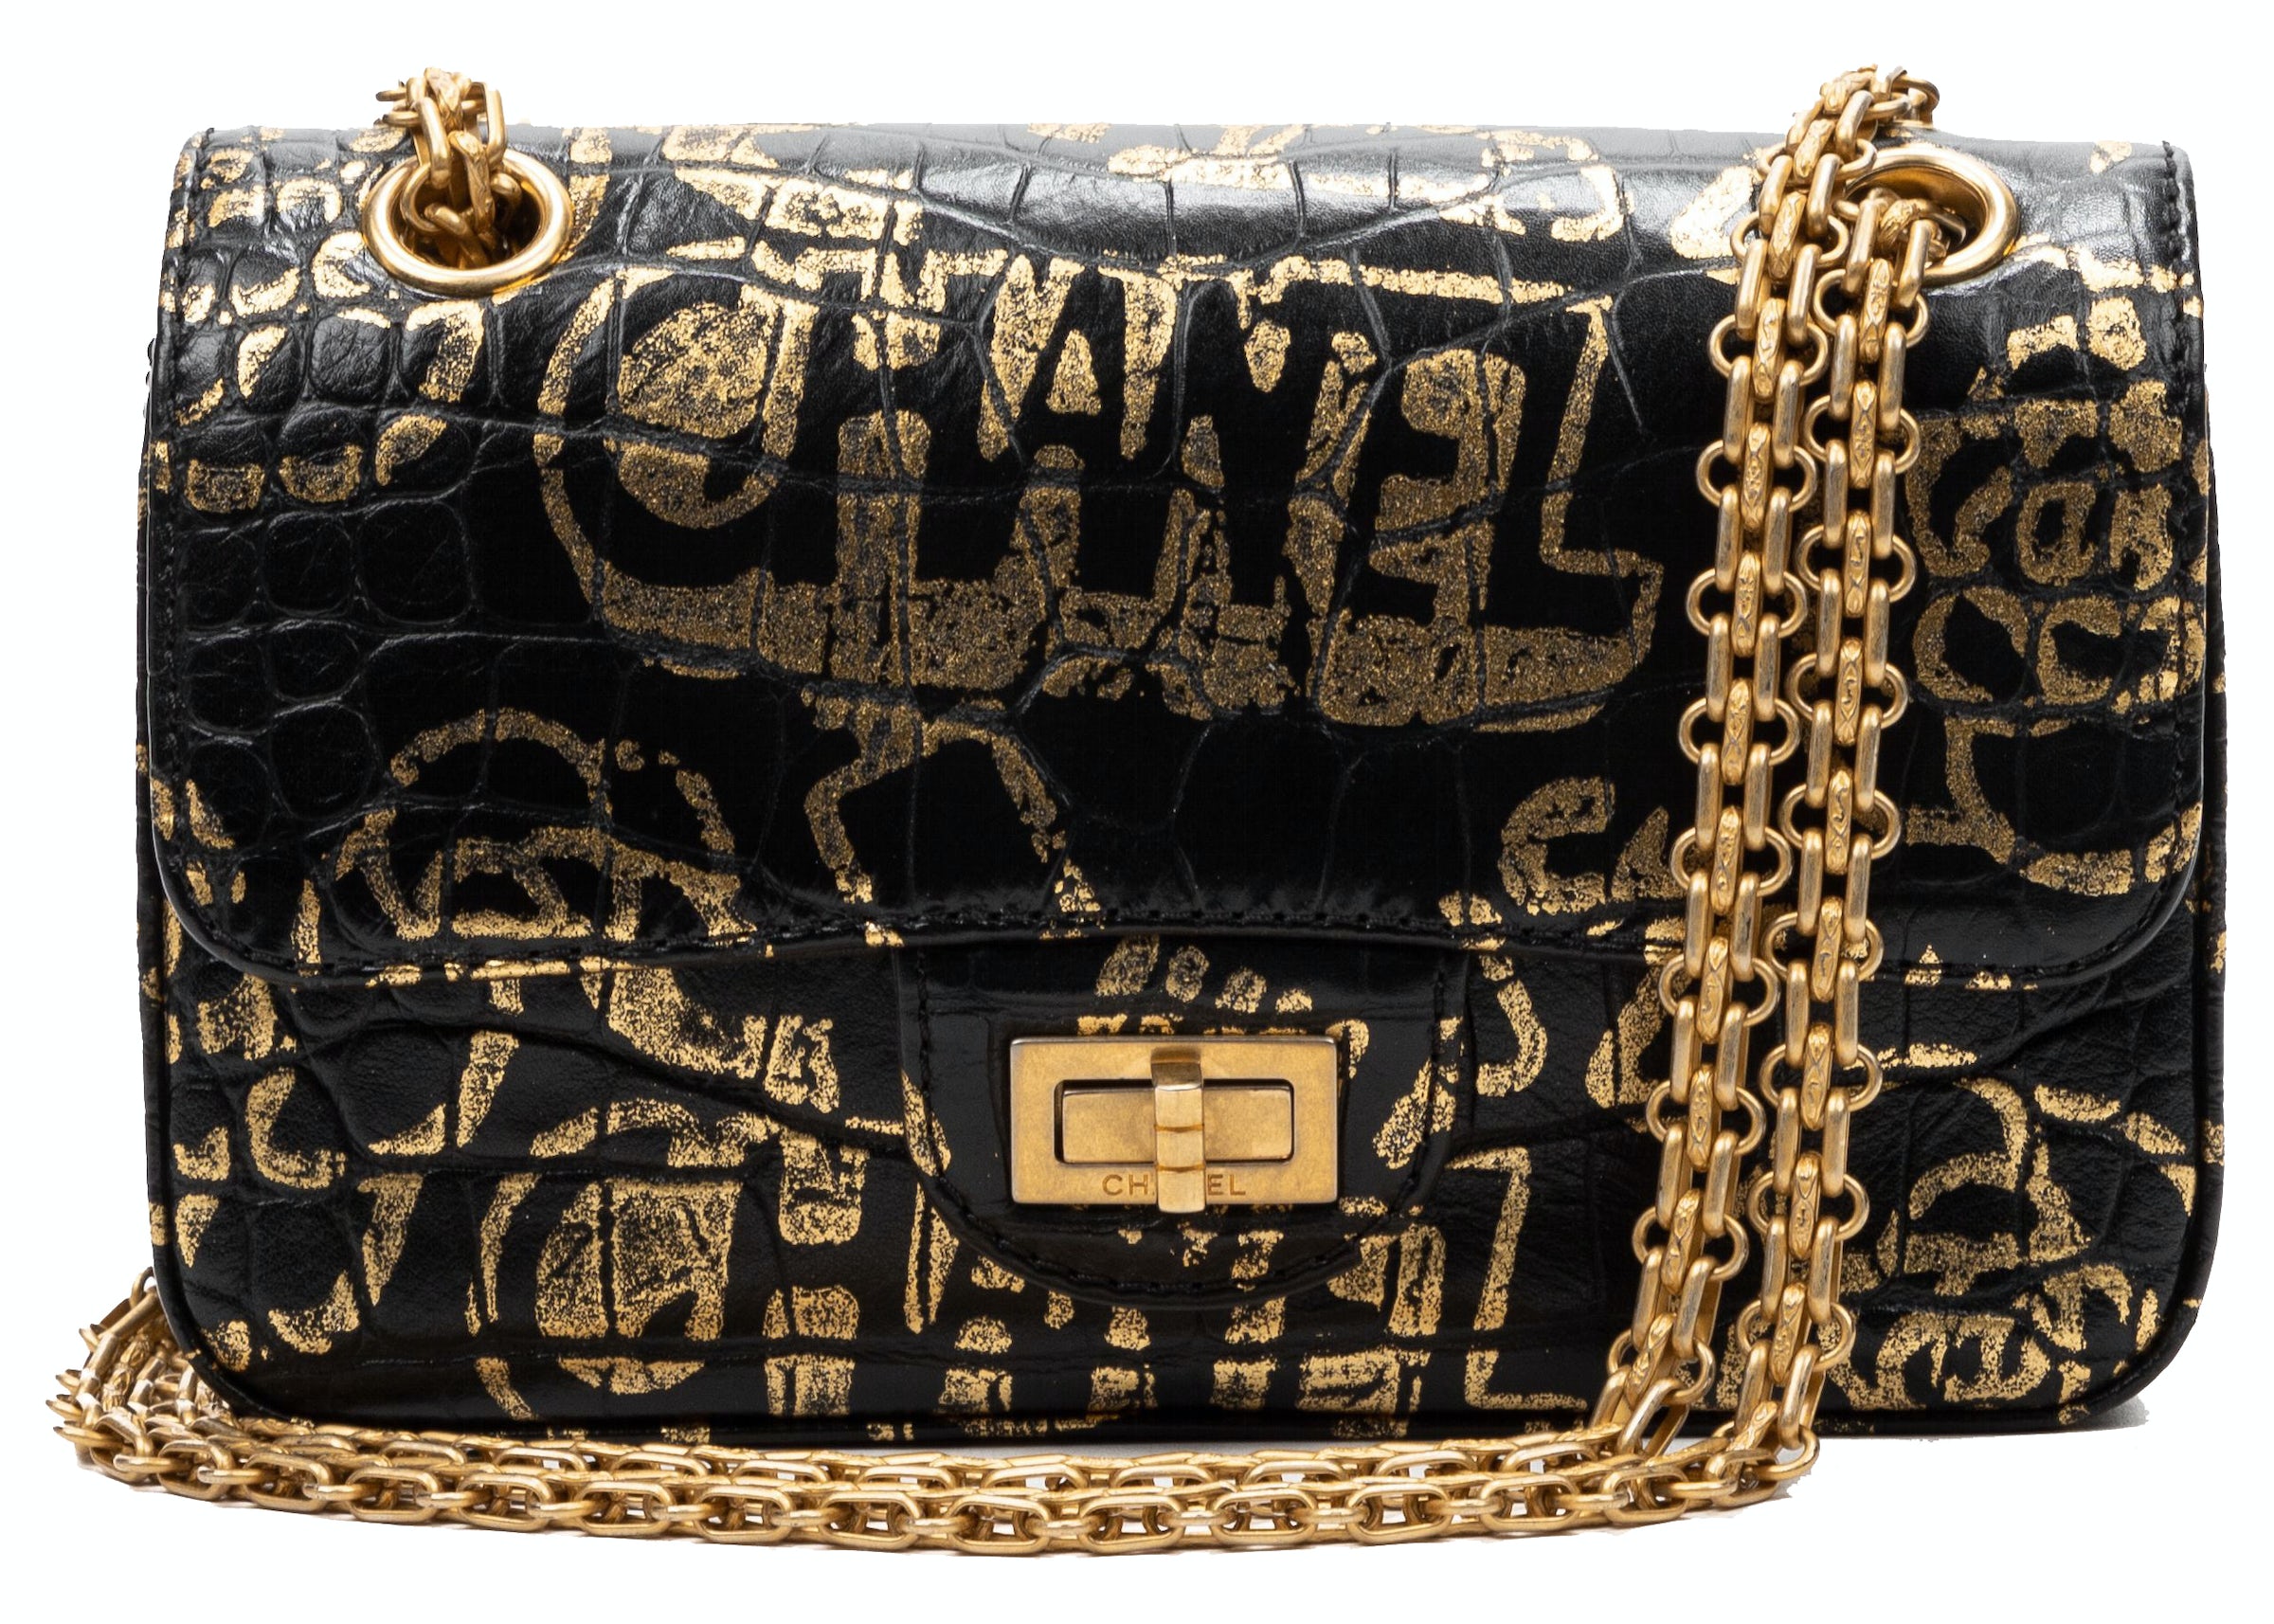 Buy Chanel Other Shoulder Bag Accessories - Colour Black - StockX